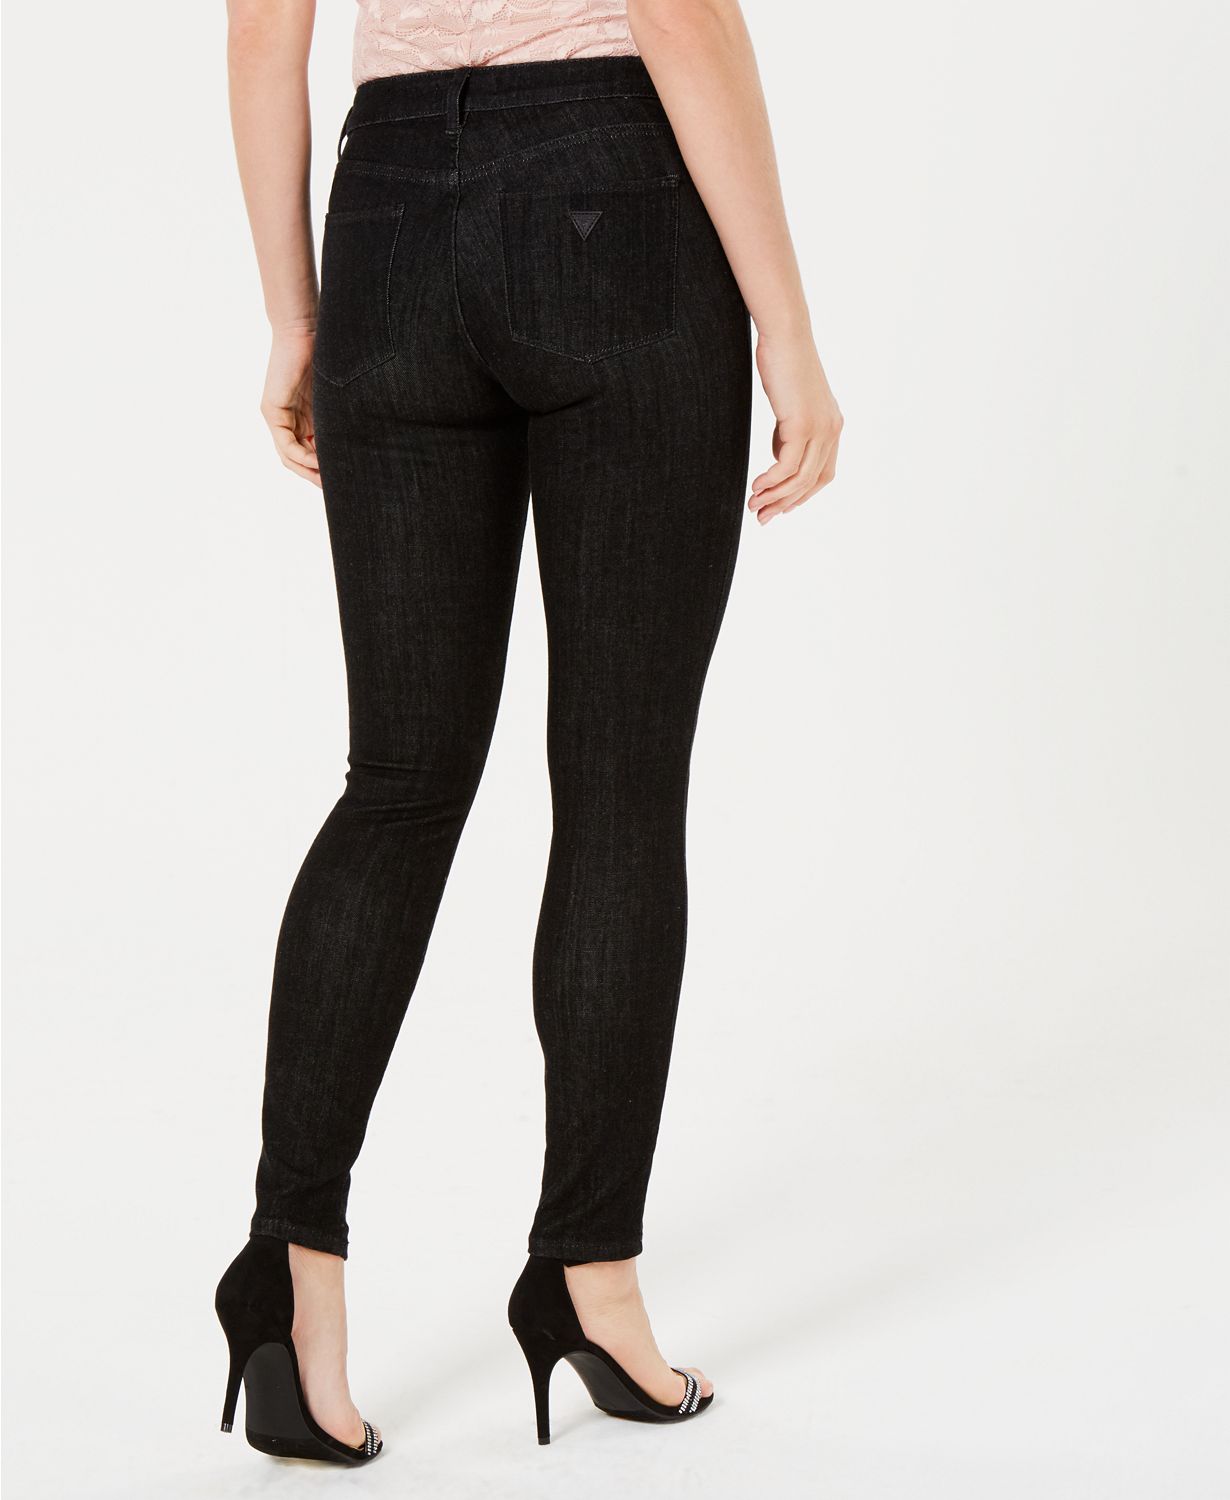 GUESS Womens Sexy Curve Skinny Jeans